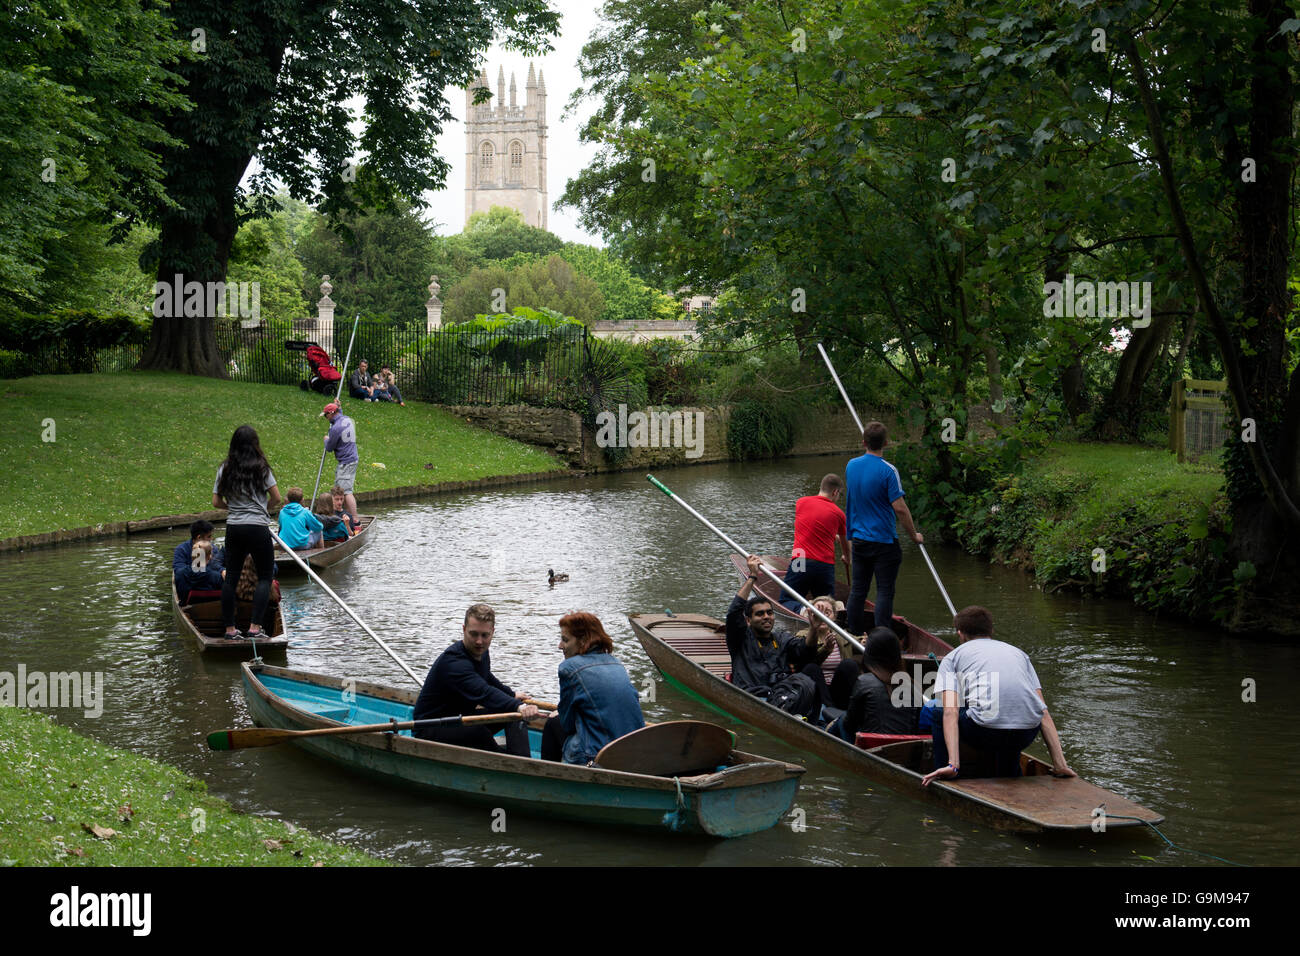 Boating on the River Cherwell with Magdalen Tower in distance, Oxford, UK Stock Photo